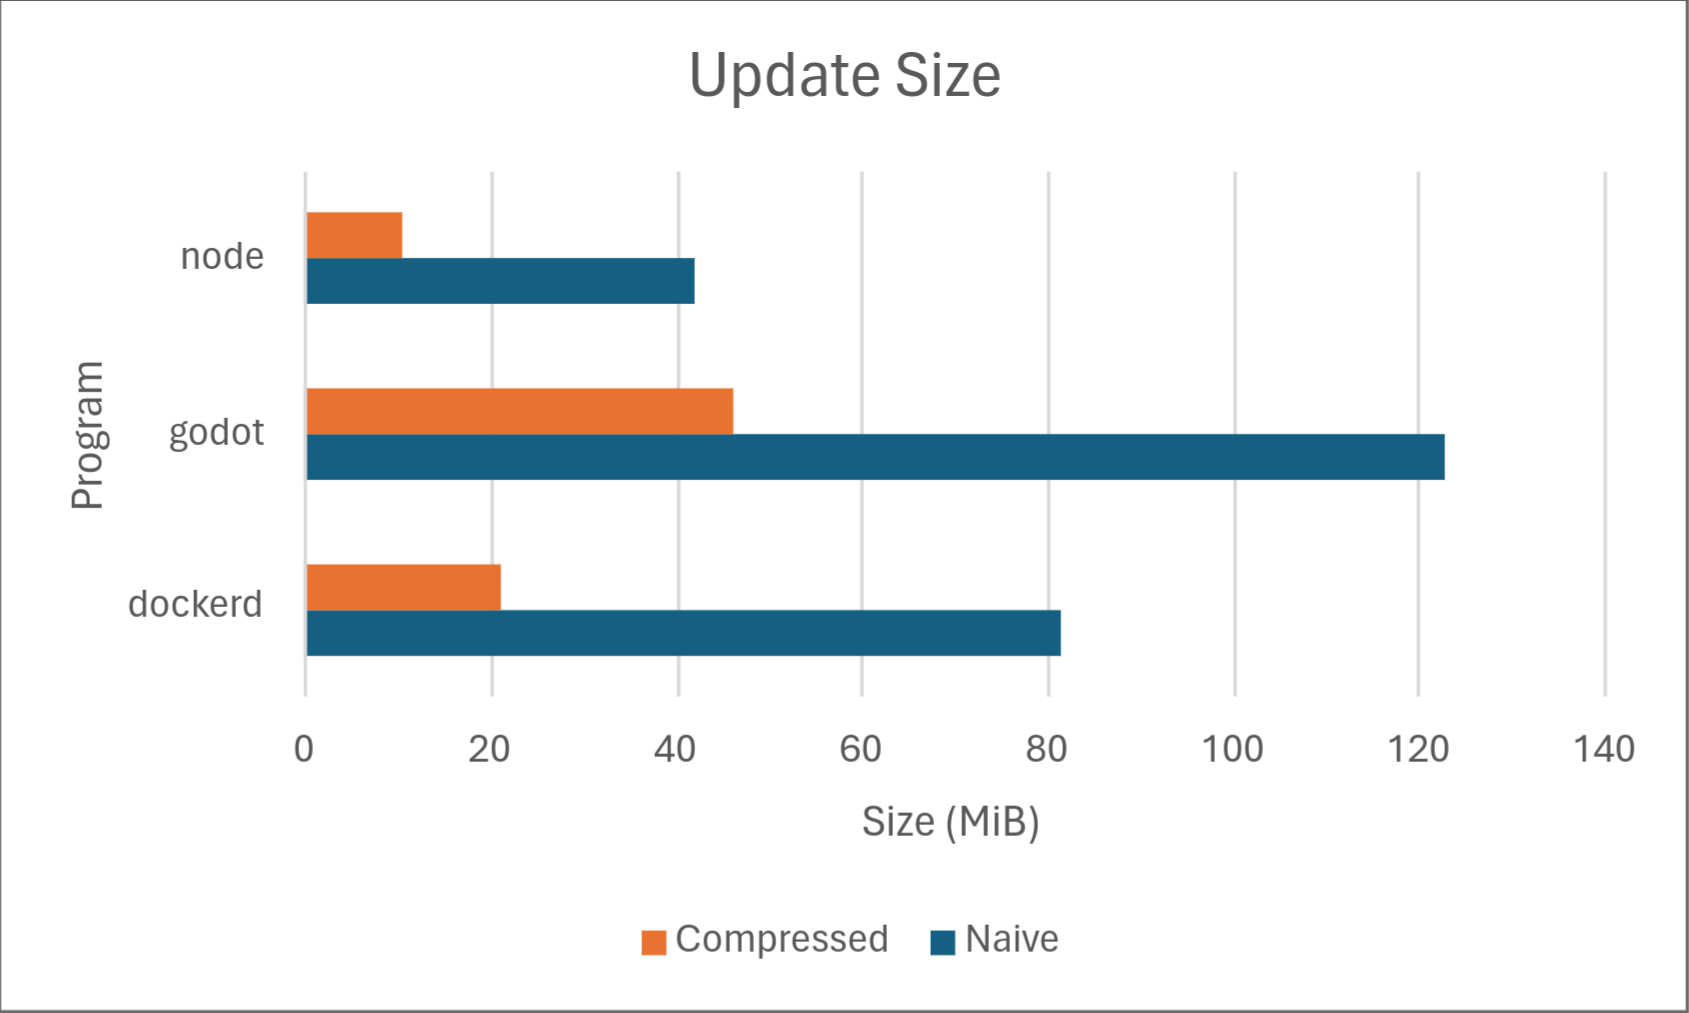 Compressed update sizes compared against the naive approach